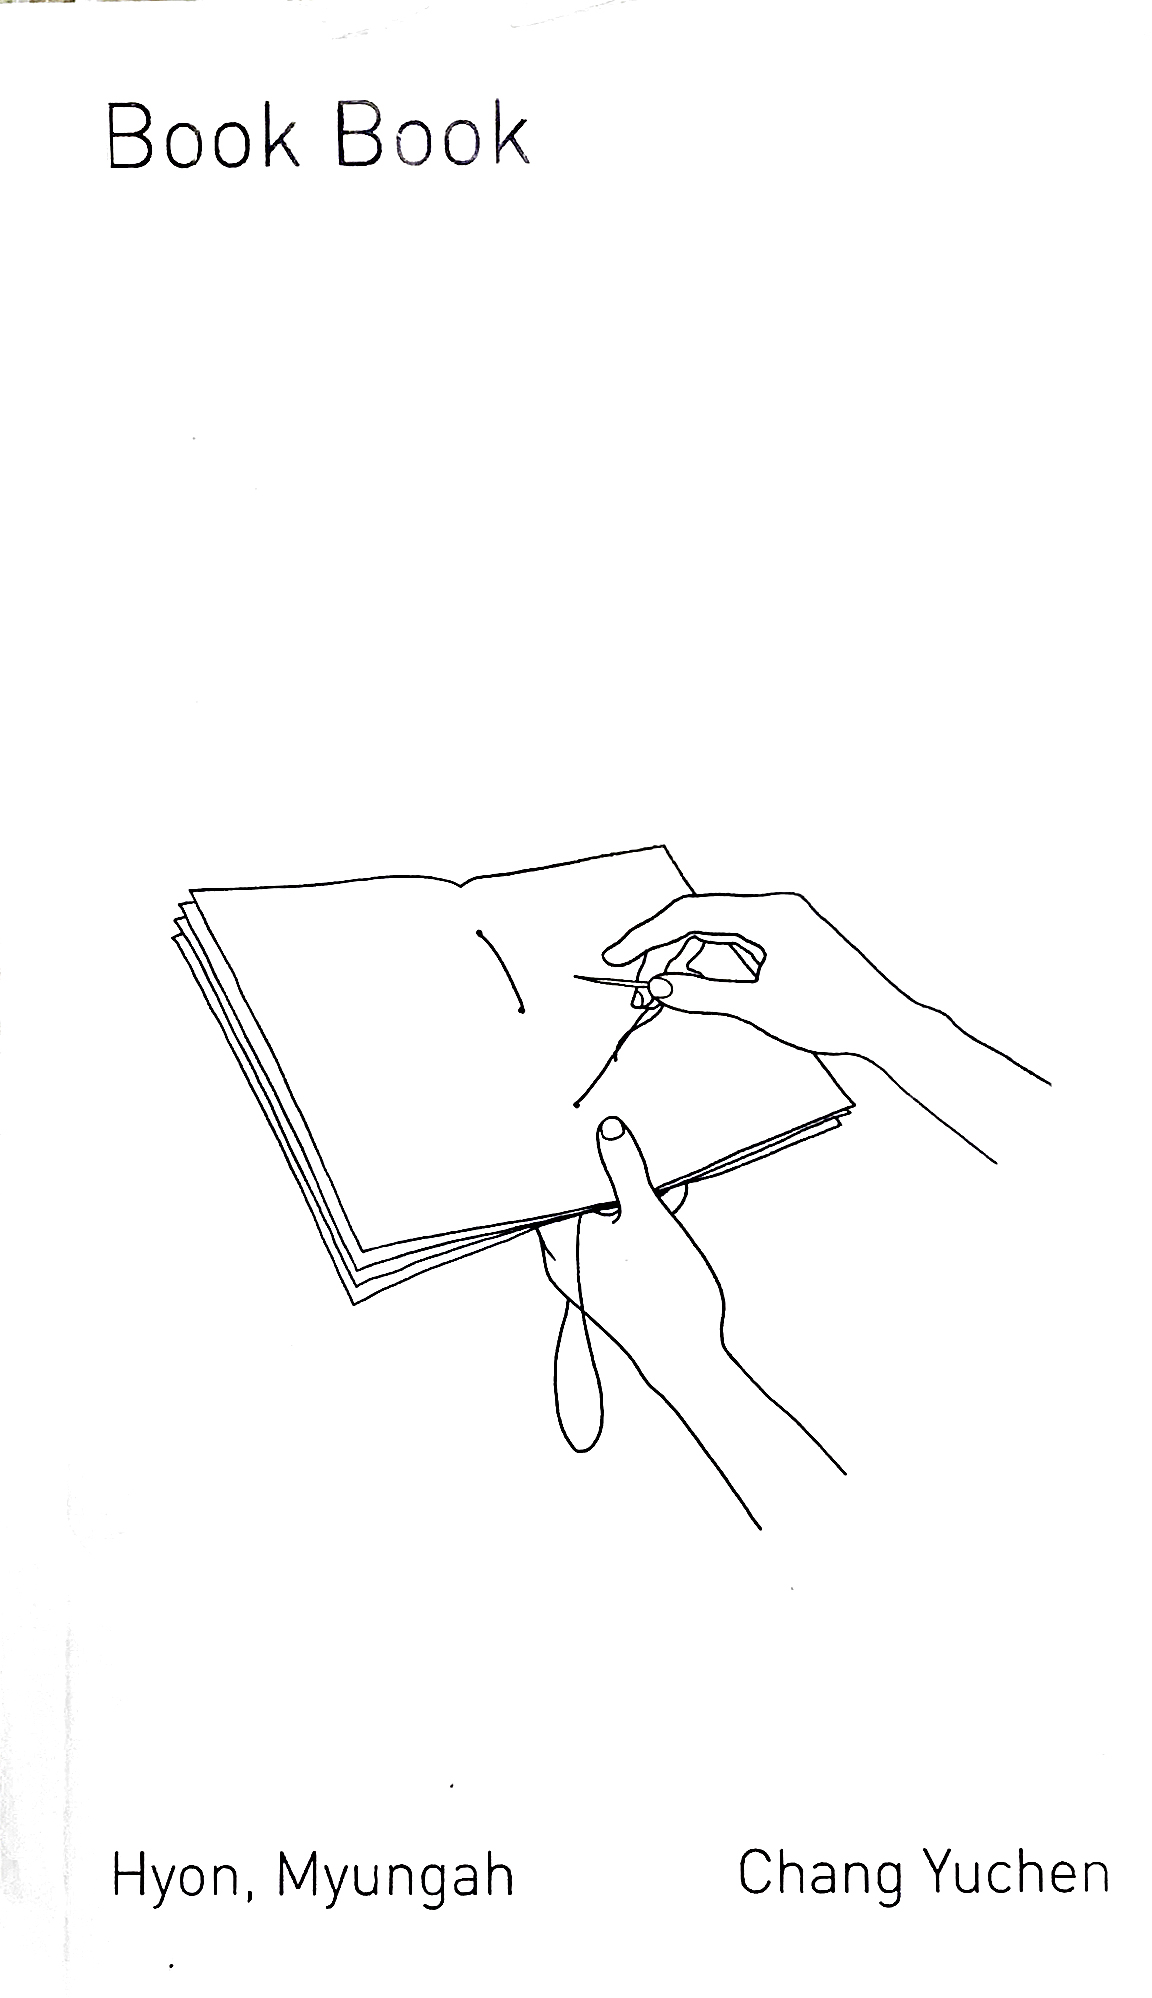 drawing of hands sewing a book